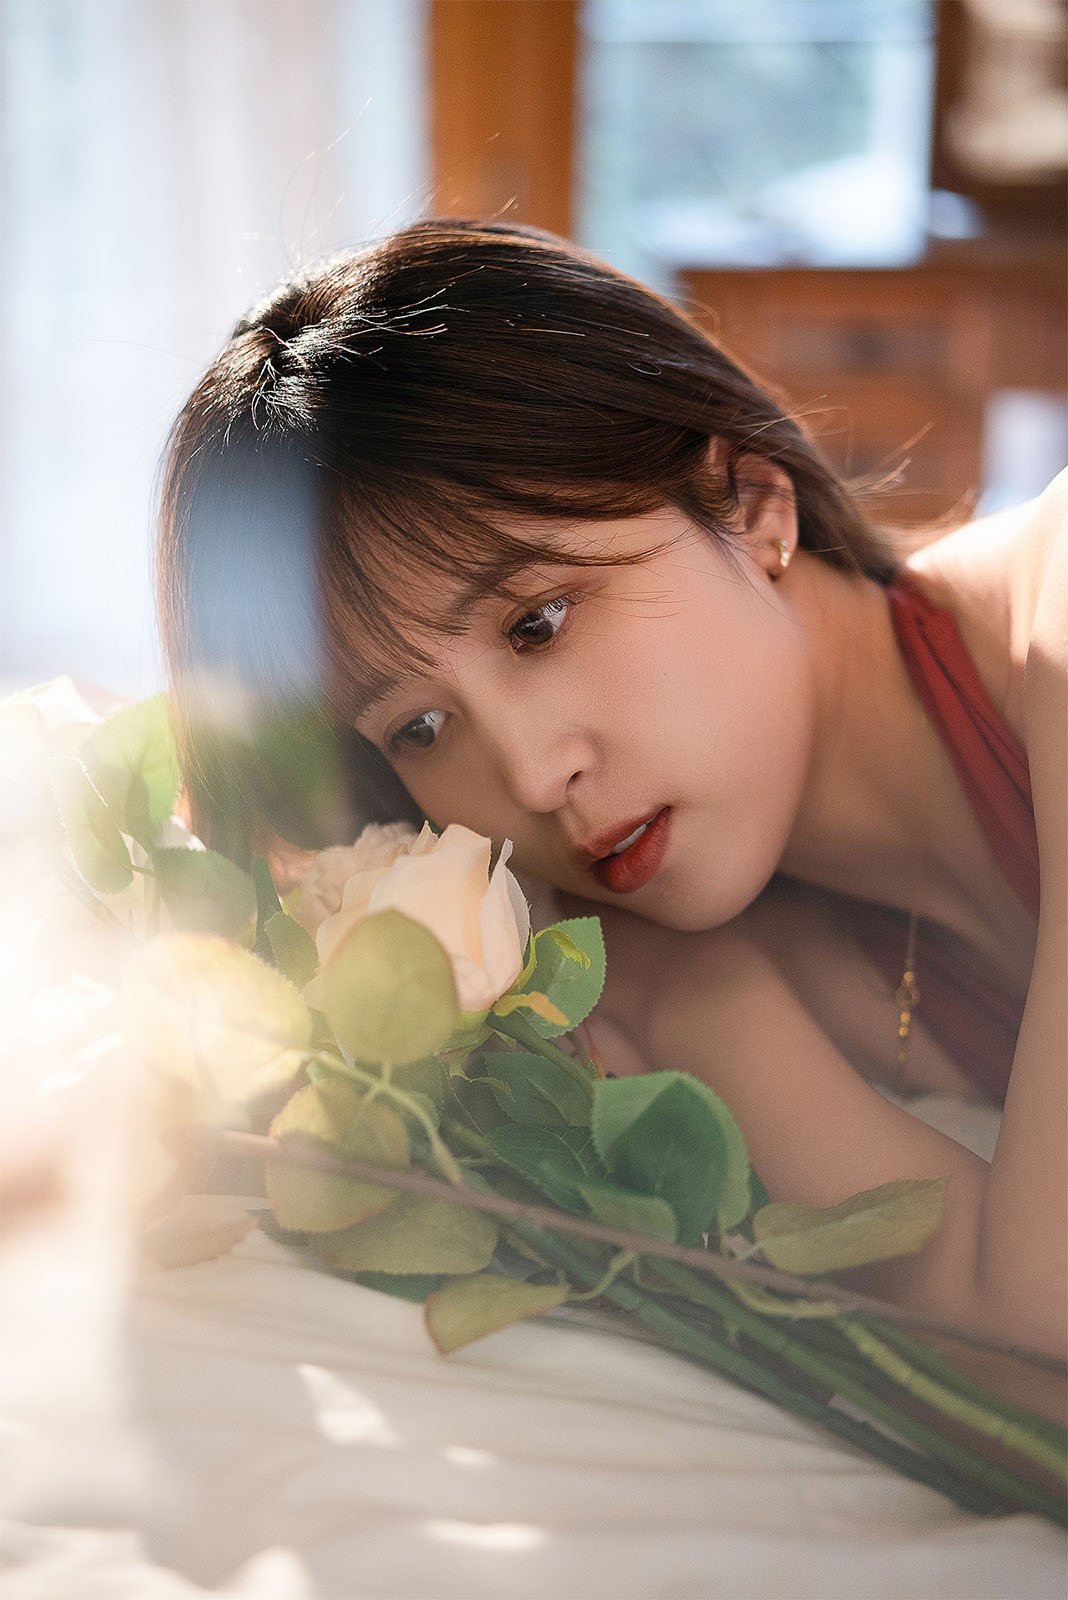 A woman in a red top lies on her side, gazing at a bouquet of white roses with sunlight filtering through a window, creating a warm, serene ambiance.